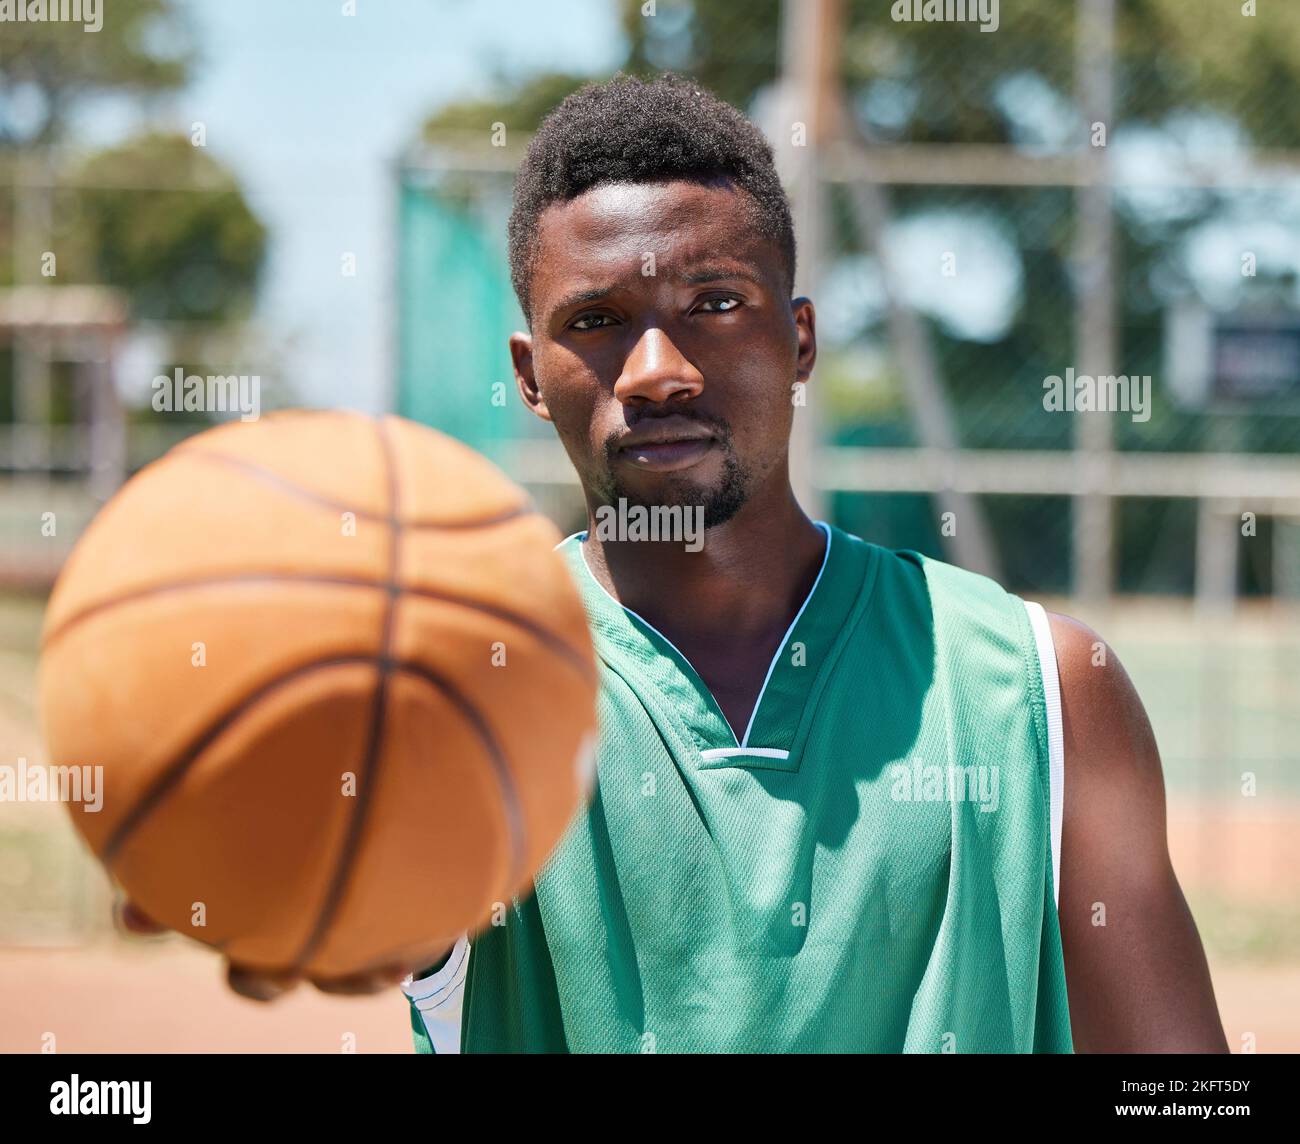 Basketball, serious face and black man ready for fitness, training and sports game outdoor. Portrait of a athlete before exercise, wellness and body Stock Photo